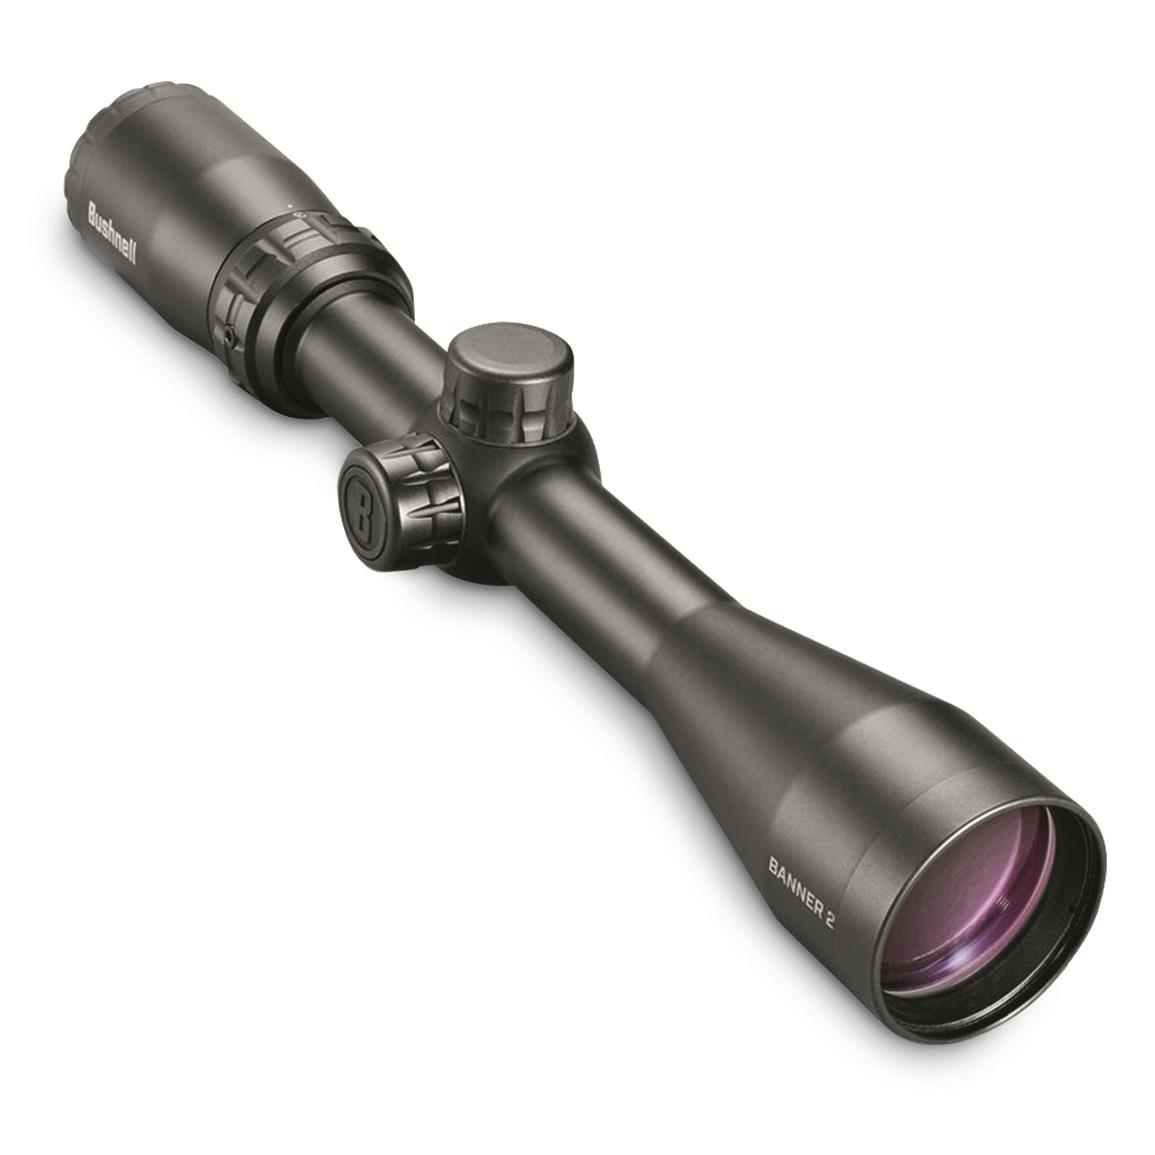 Bushnell Banner 2 3-9x40mm Rifle Scope, SFP DOA QBR Reticle